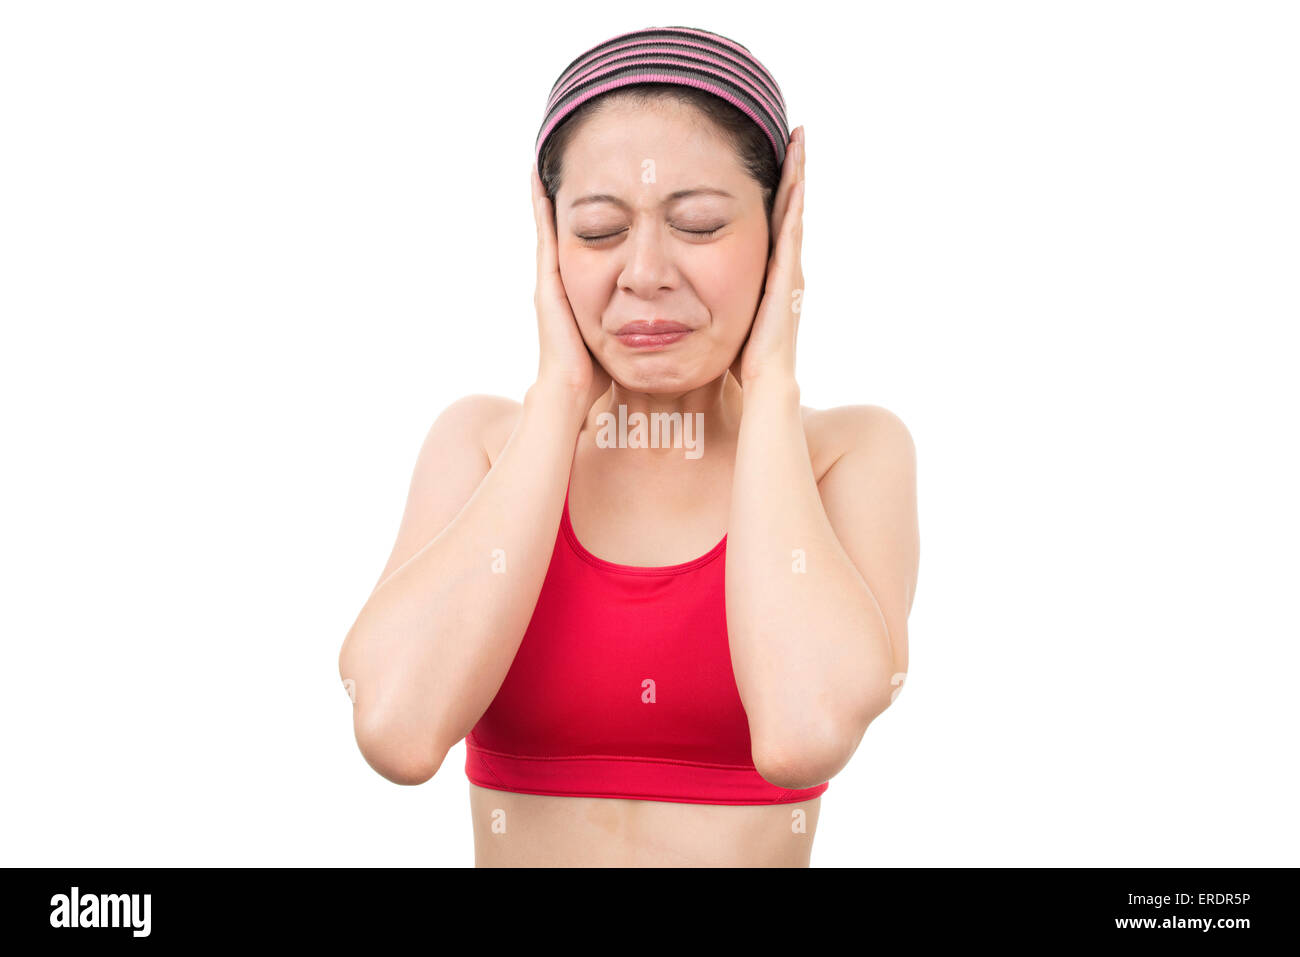 Women blocking out loud noise from ears Stock Photo